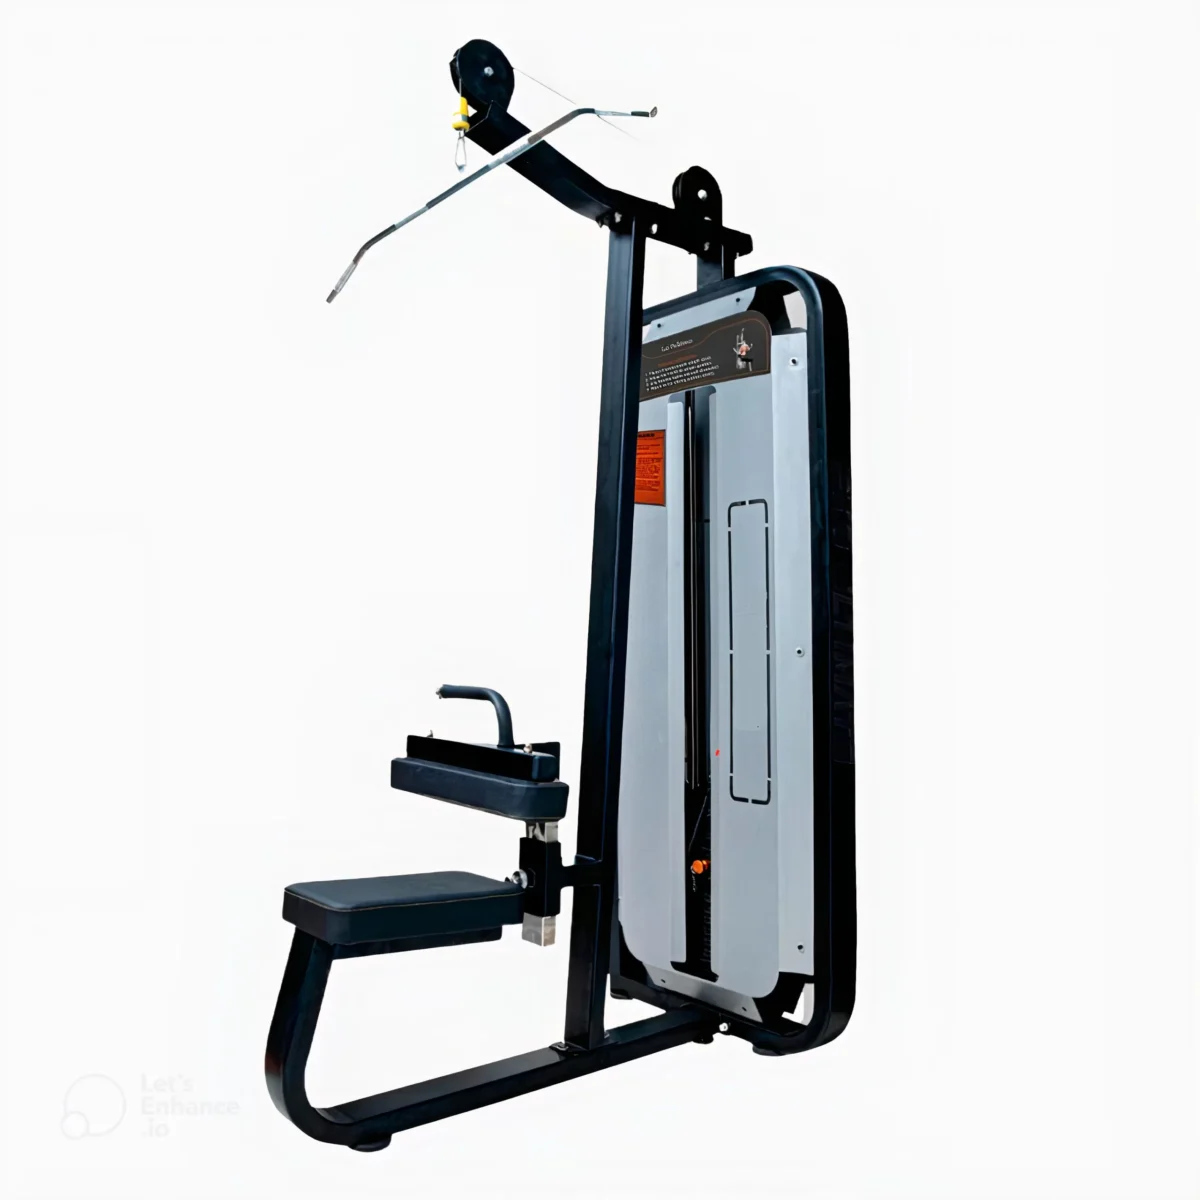 A lat pull down machine, designed for upper body strength training, featuring a seated position, pulley system, and adjustable weights.